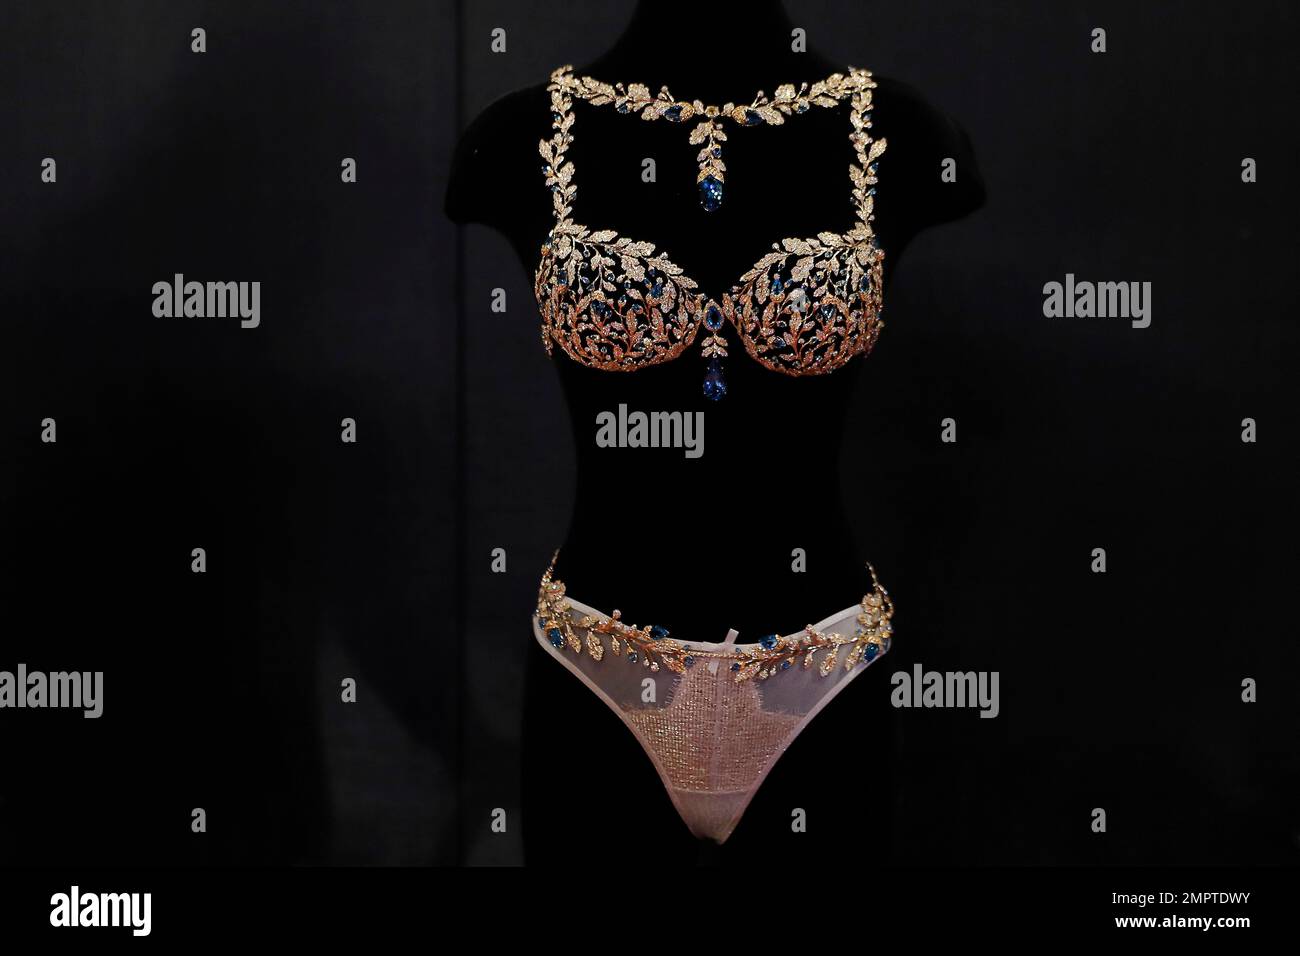 https://c8.alamy.com/comp/2MPTDWY/a-2-million-champagne-nights-fantasy-bra-which-will-be-modeled-by-angel-lais-ribeiro-is-on-display-at-backstage-before-the-victorias-secret-fashion-show-inside-the-mercedes-benz-arena-in-shanghai-china-monday-nov-20-2017-the-victorias-secret-fashion-show-takes-place-in-shanghai-on-monday-with-performances-from-singer-harry-styles-and-rb-star-miguel-ap-photoandy-wong-2MPTDWY.jpg